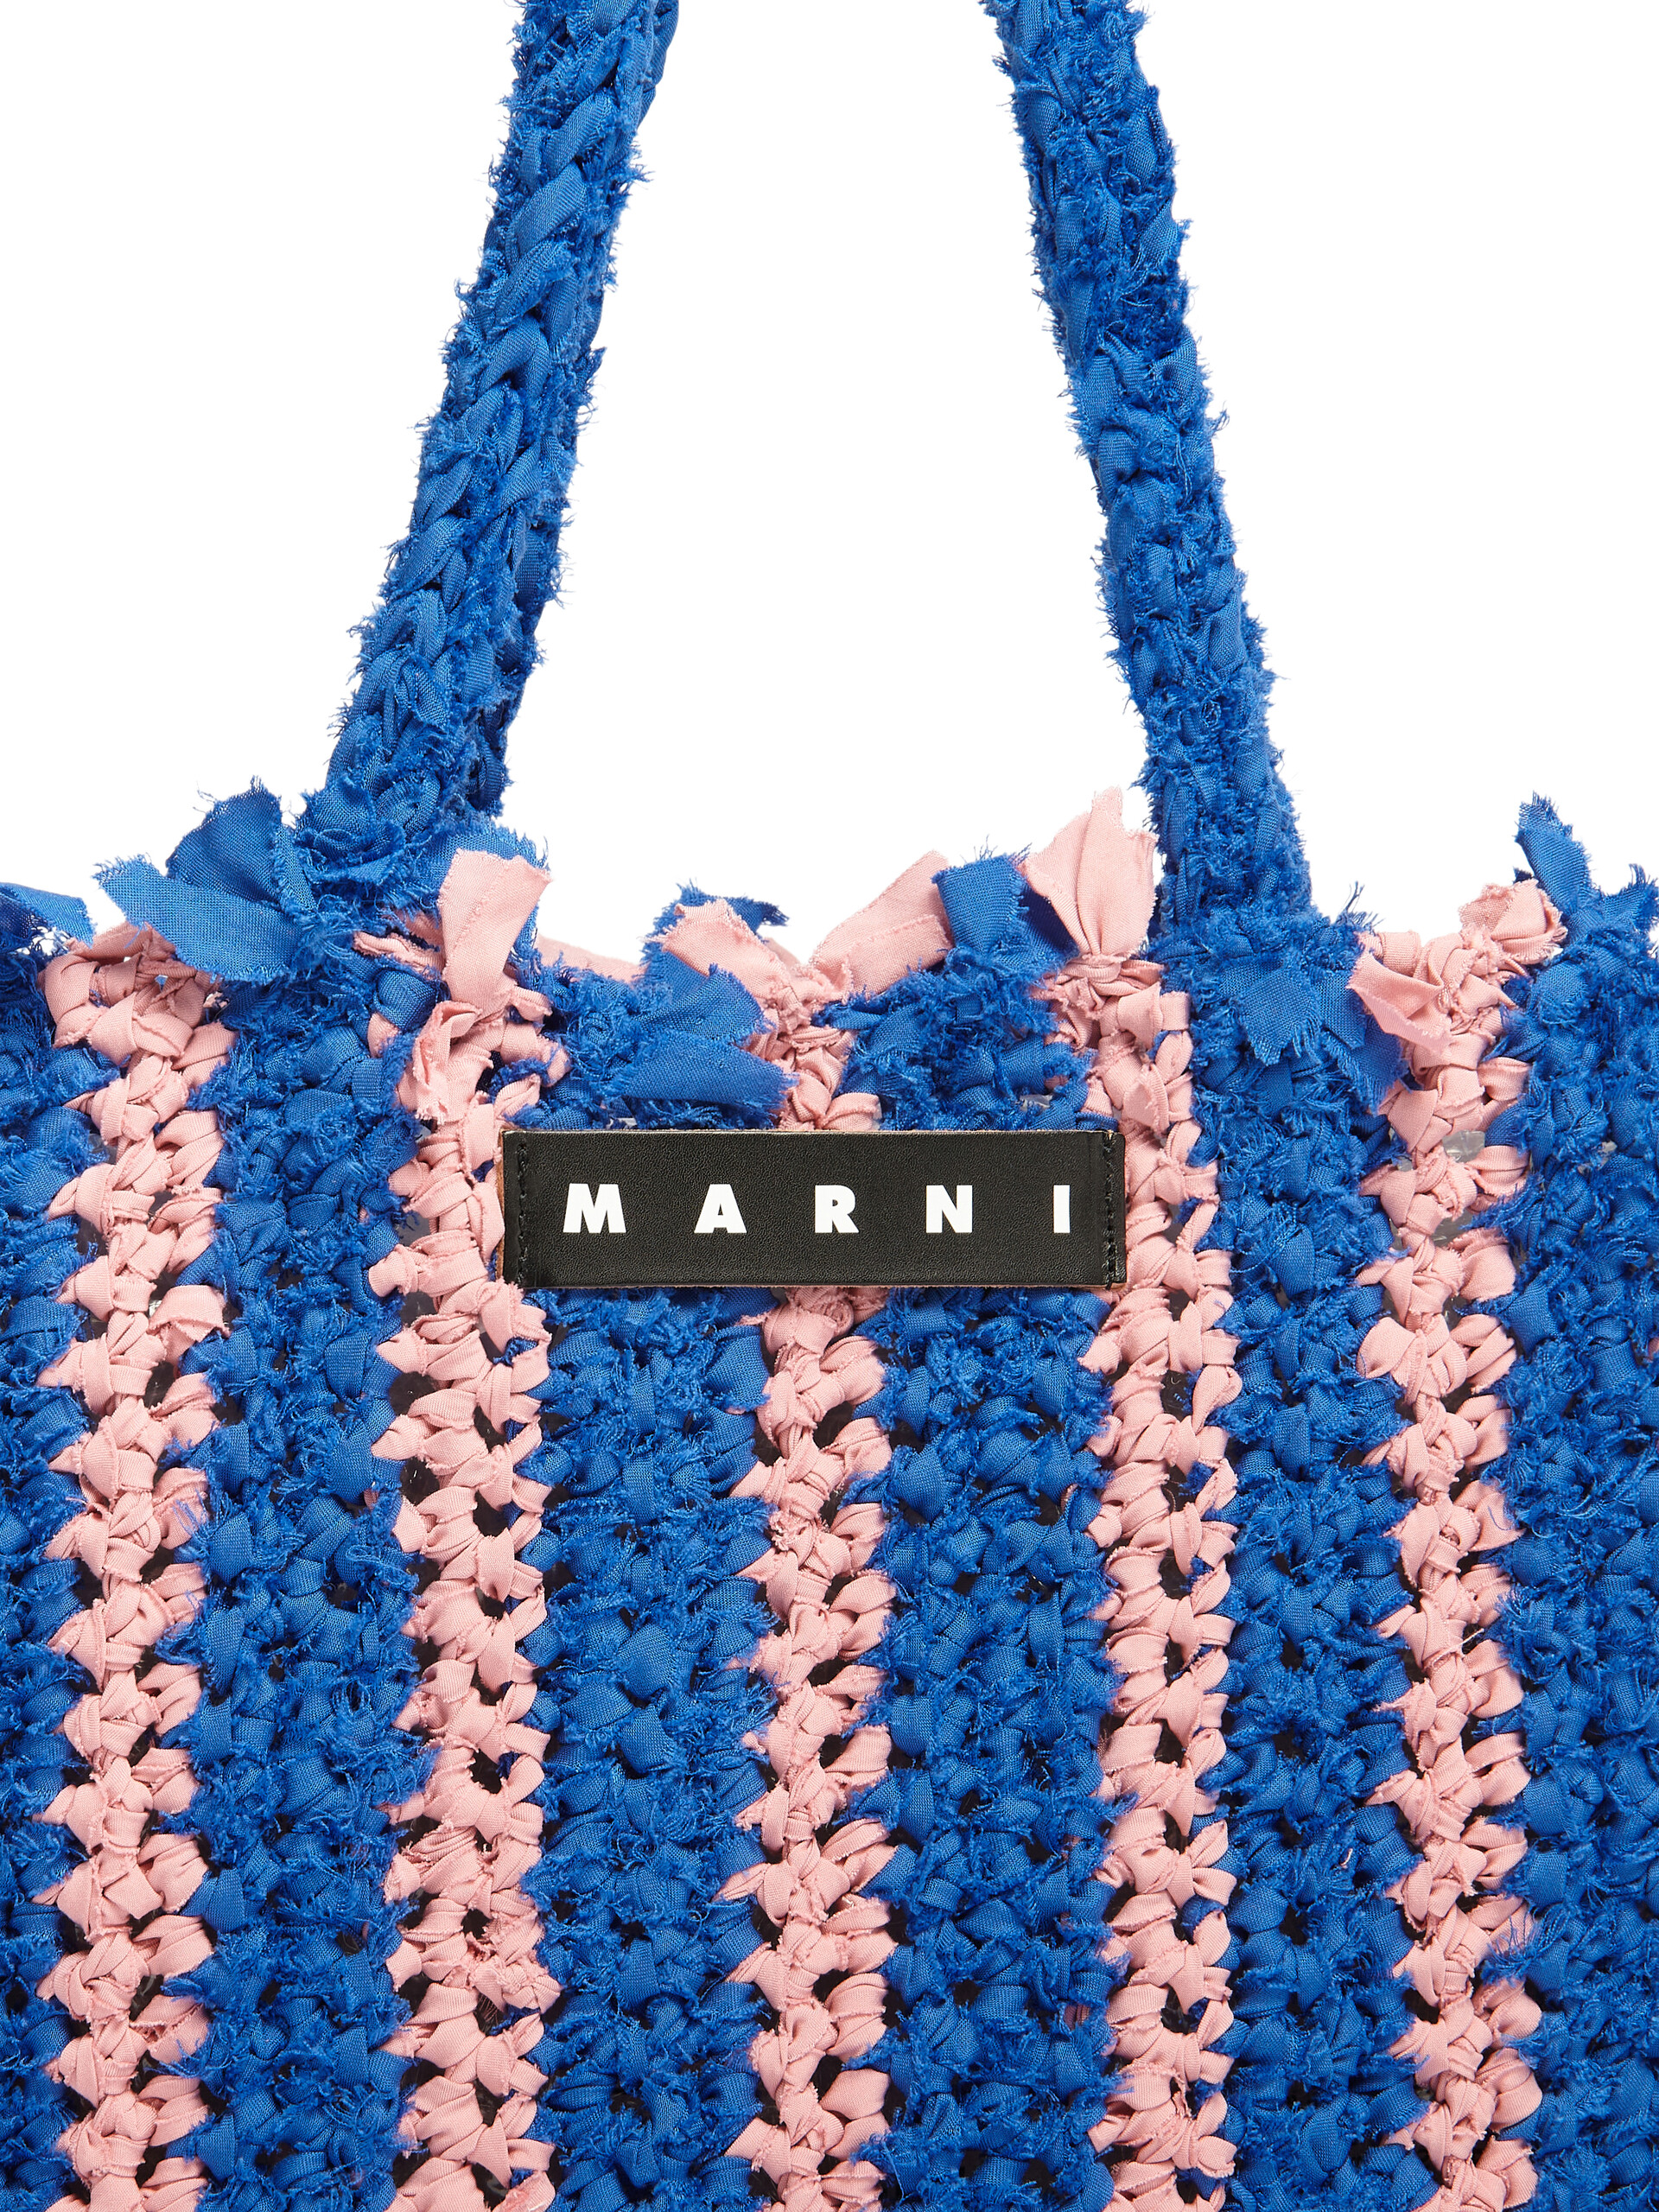 Pink and blue cotton MARNI MARKET bag - Bags - Image 4